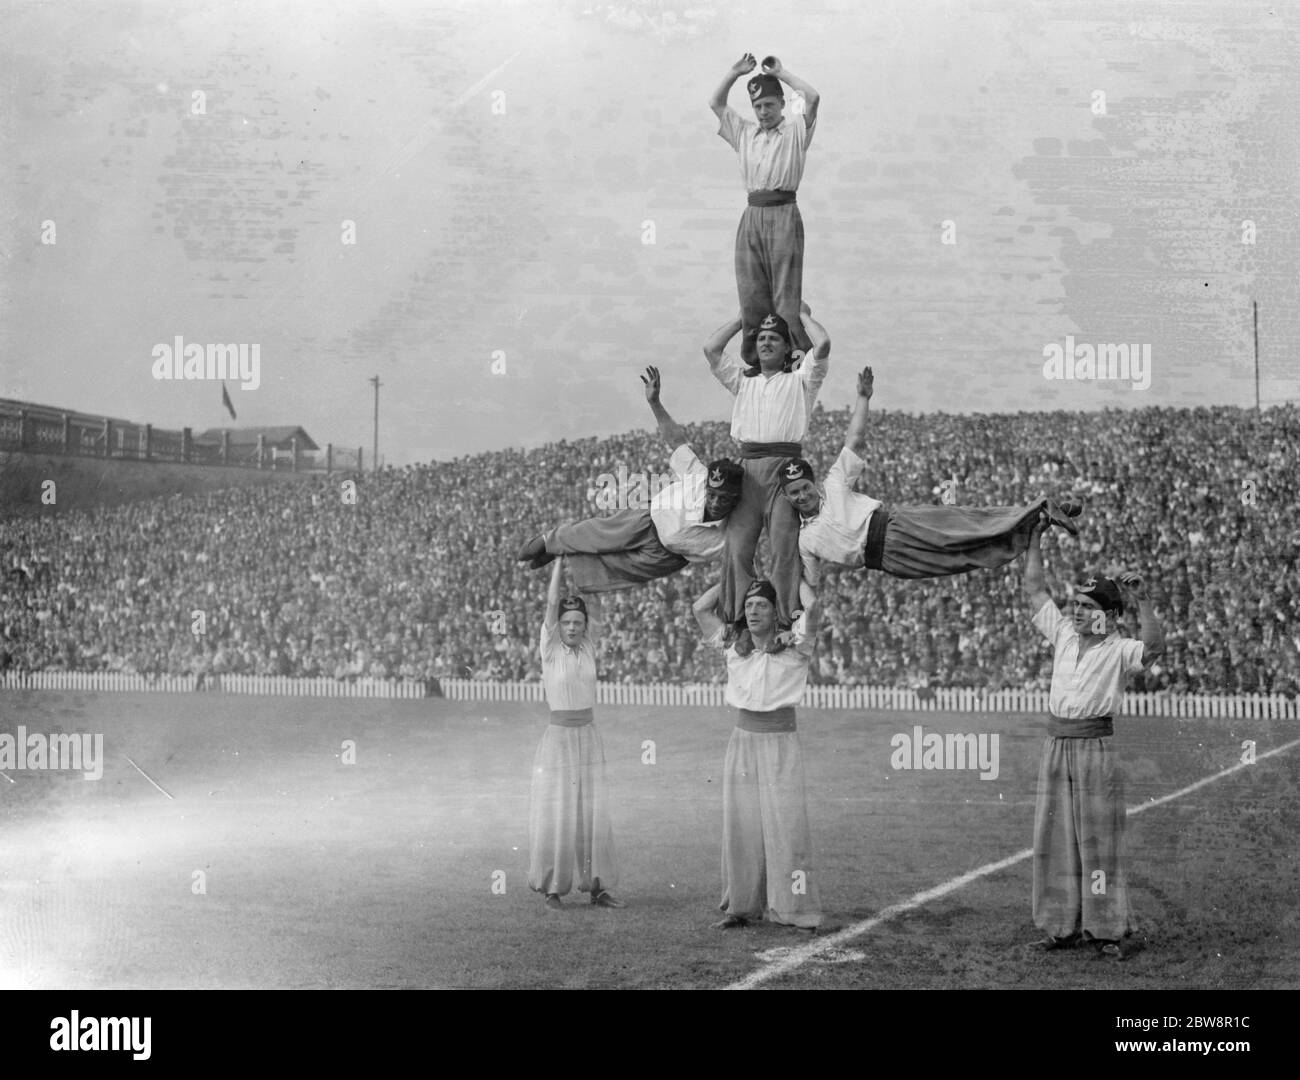 Newport County Association Football Club versus Millwall Football Club . Half time entertainment by a group of acrobats in a human pyramid . 1936 Stock Photo